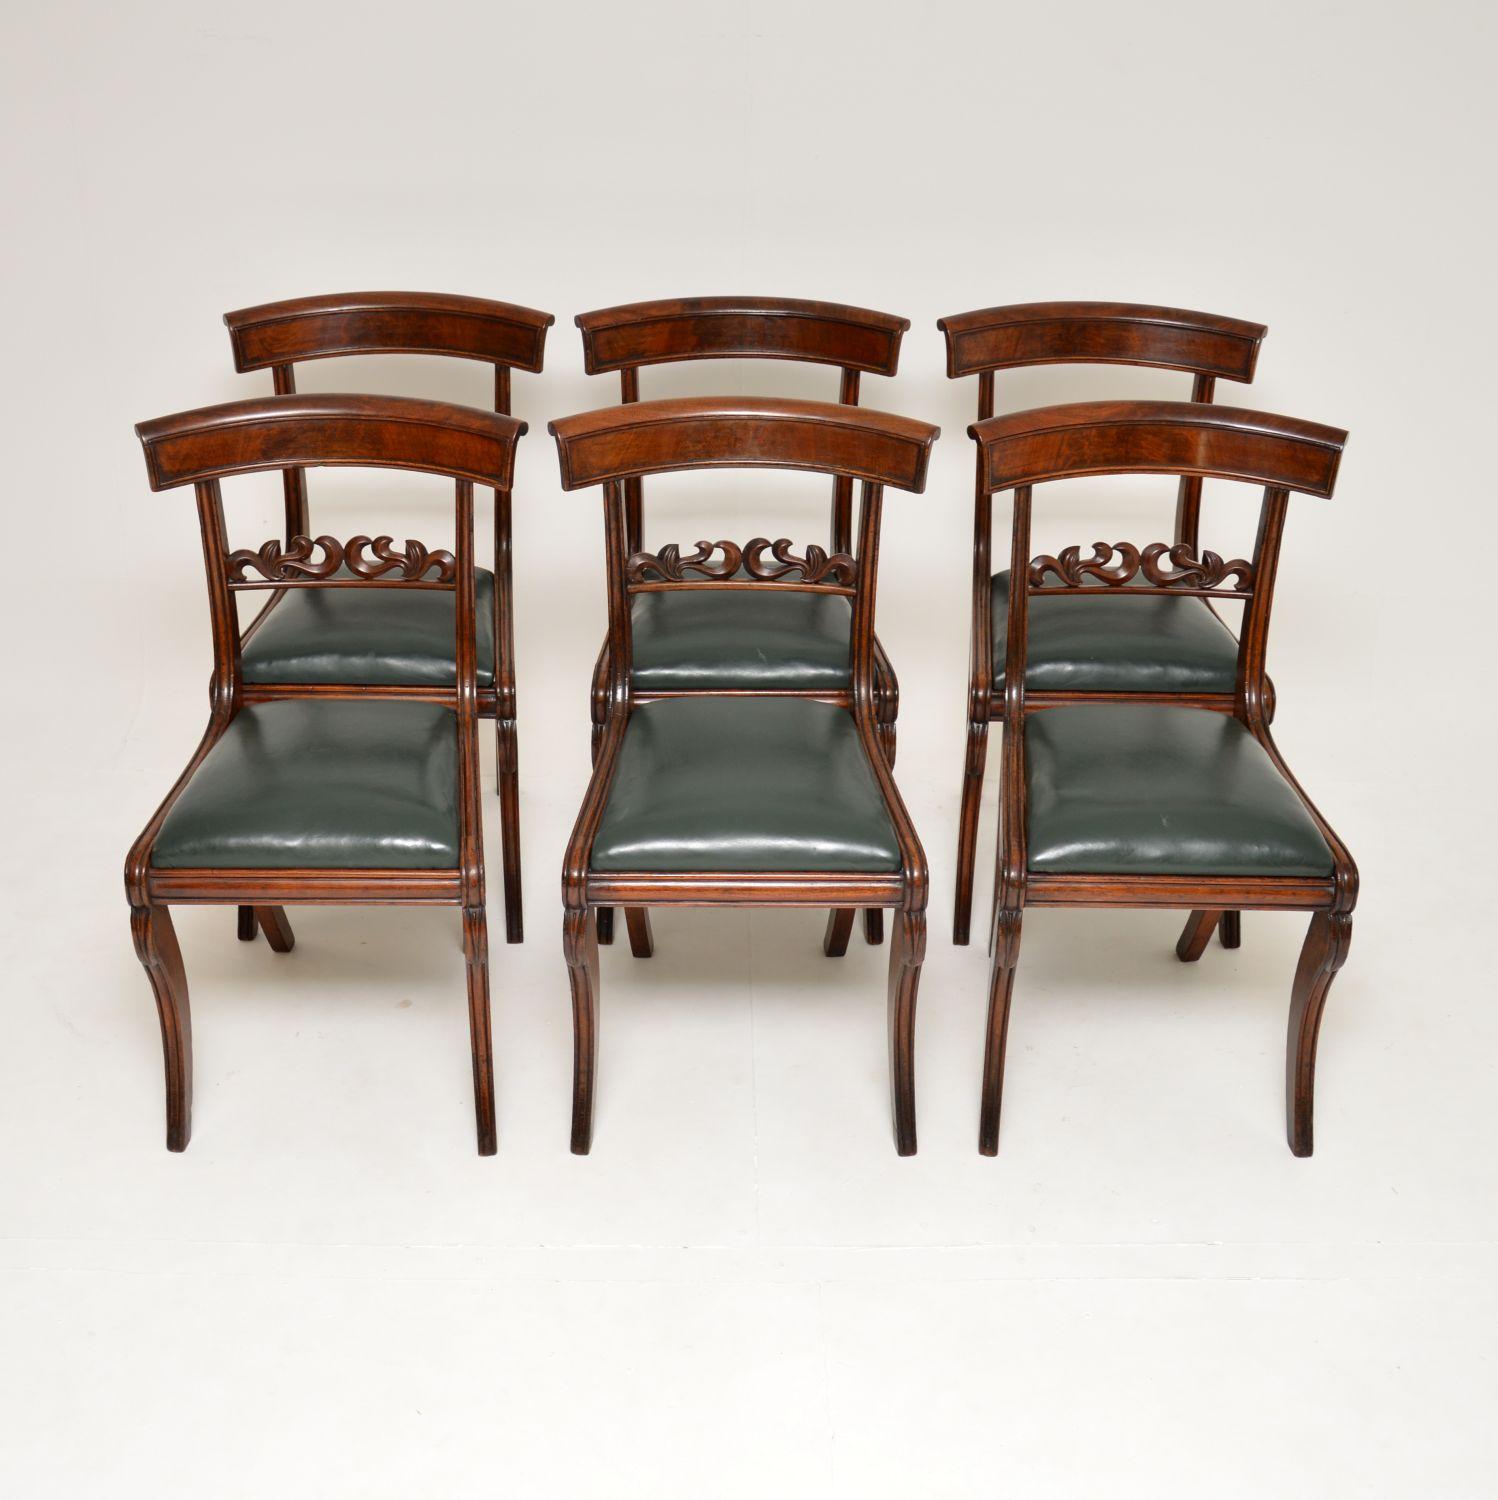 English Set of 6 Antique Regency Wood & Leather Dining Chairs